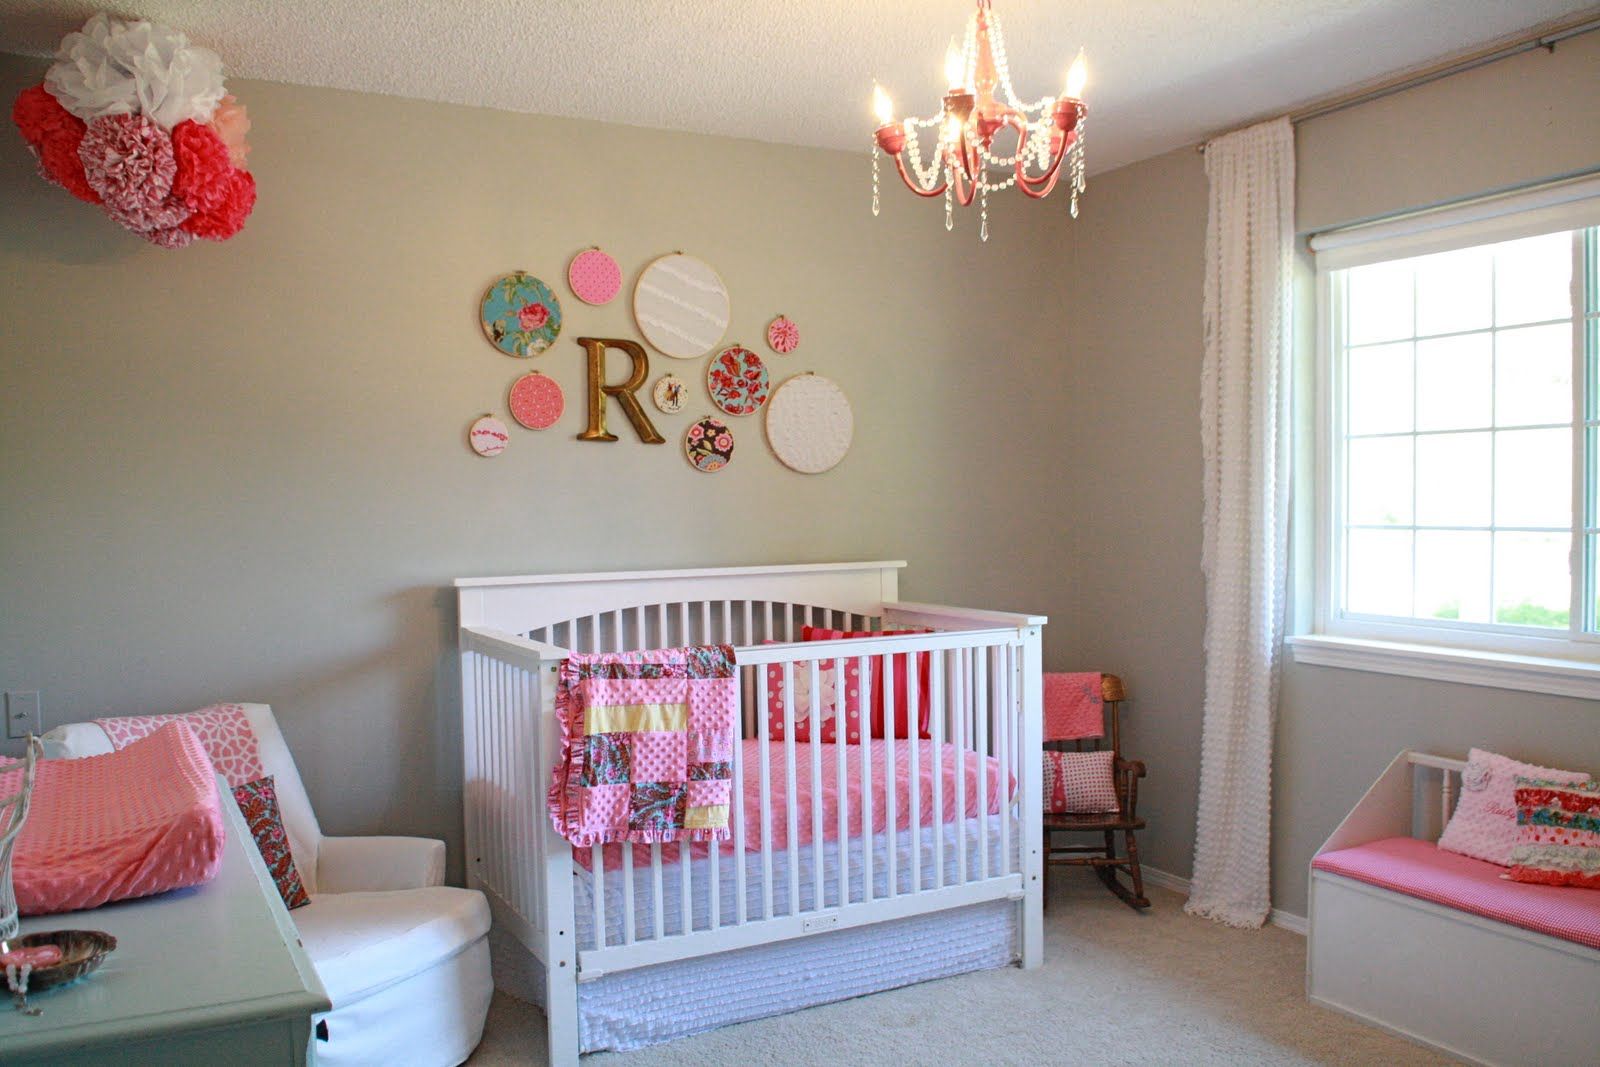 Decor For A Baby Girl’s Room -   Best Baby girl rooms ideas